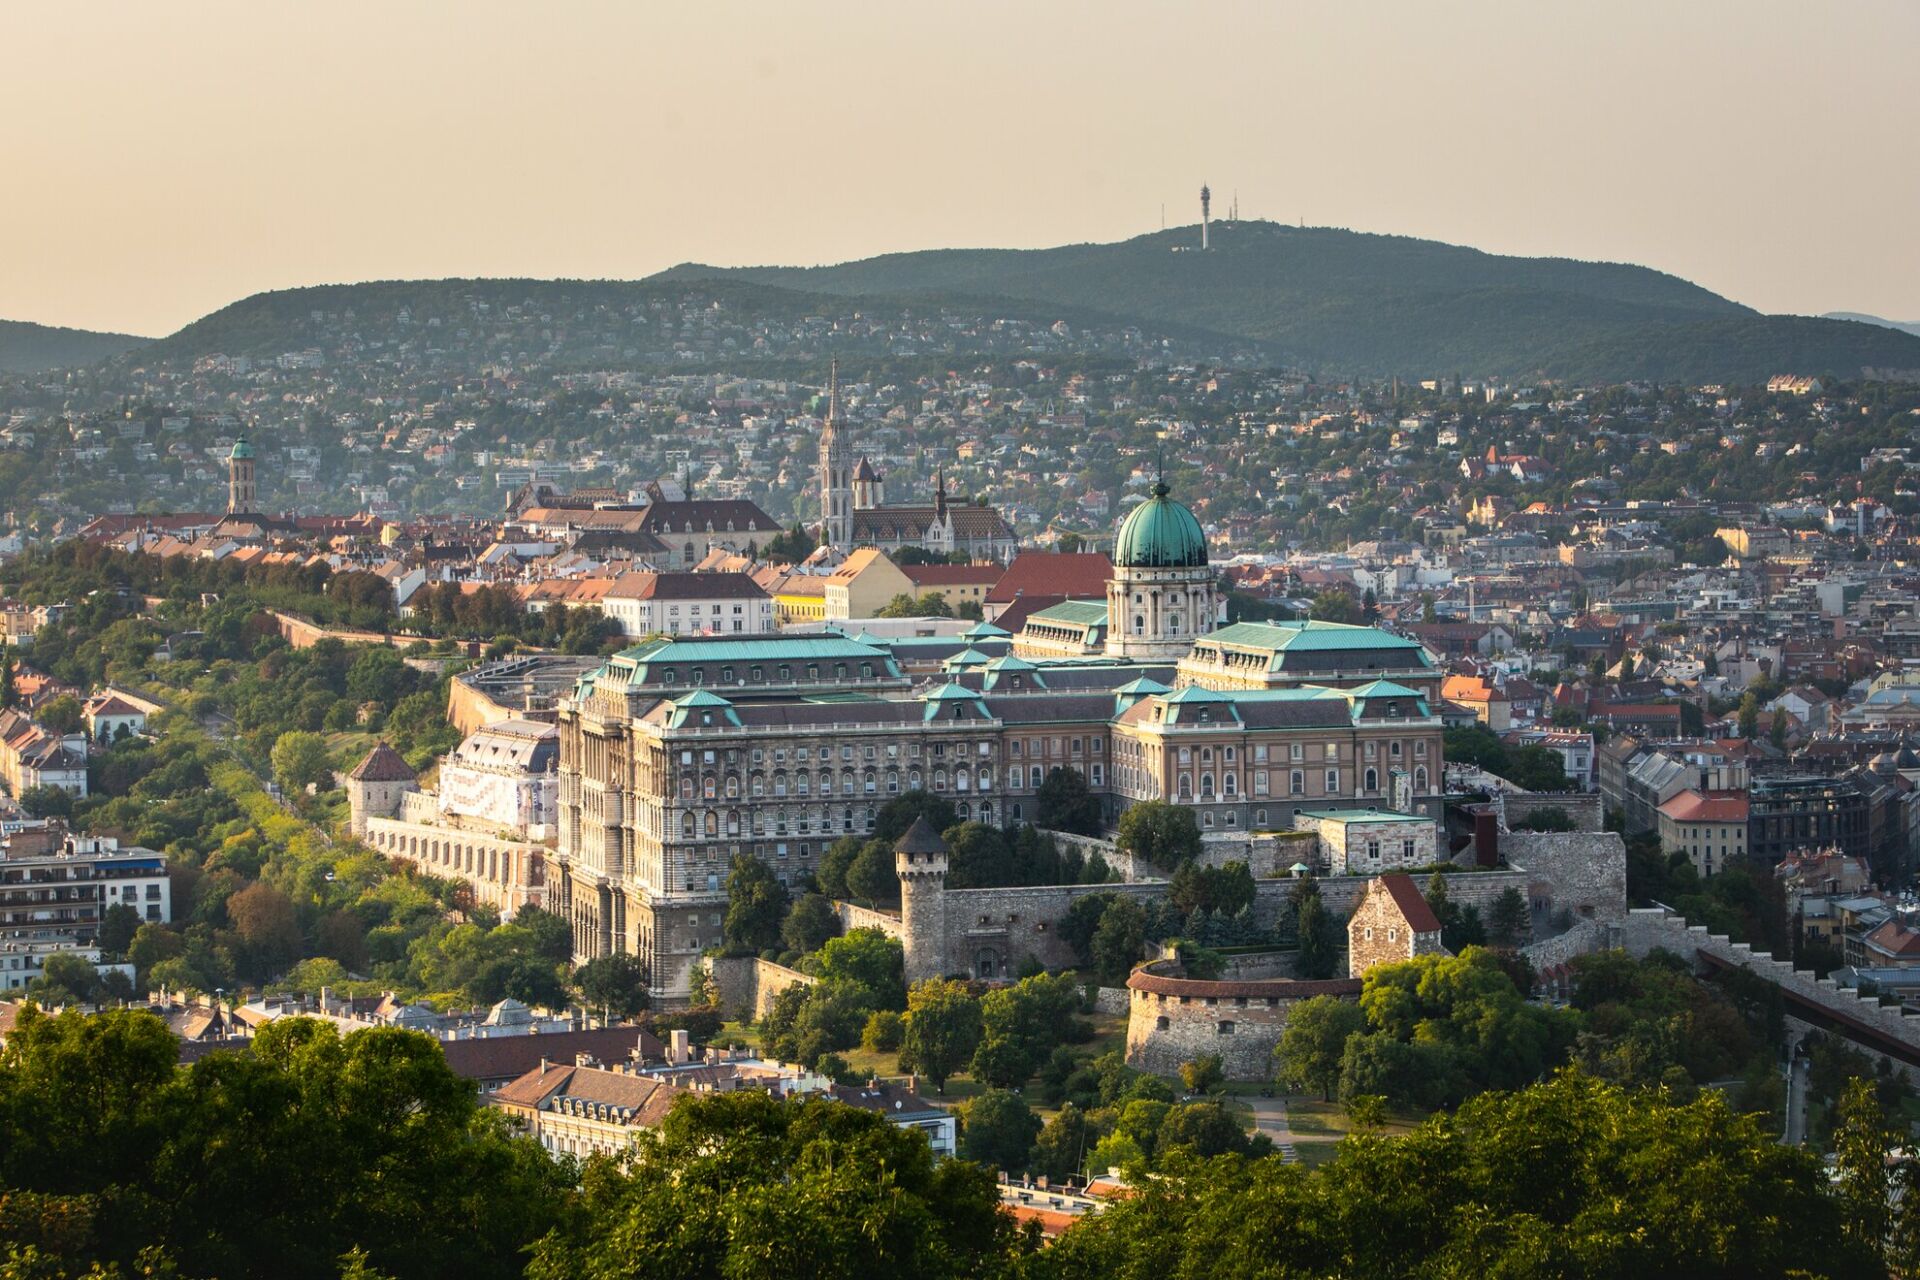 The iconic Buda Castle and the Castle District